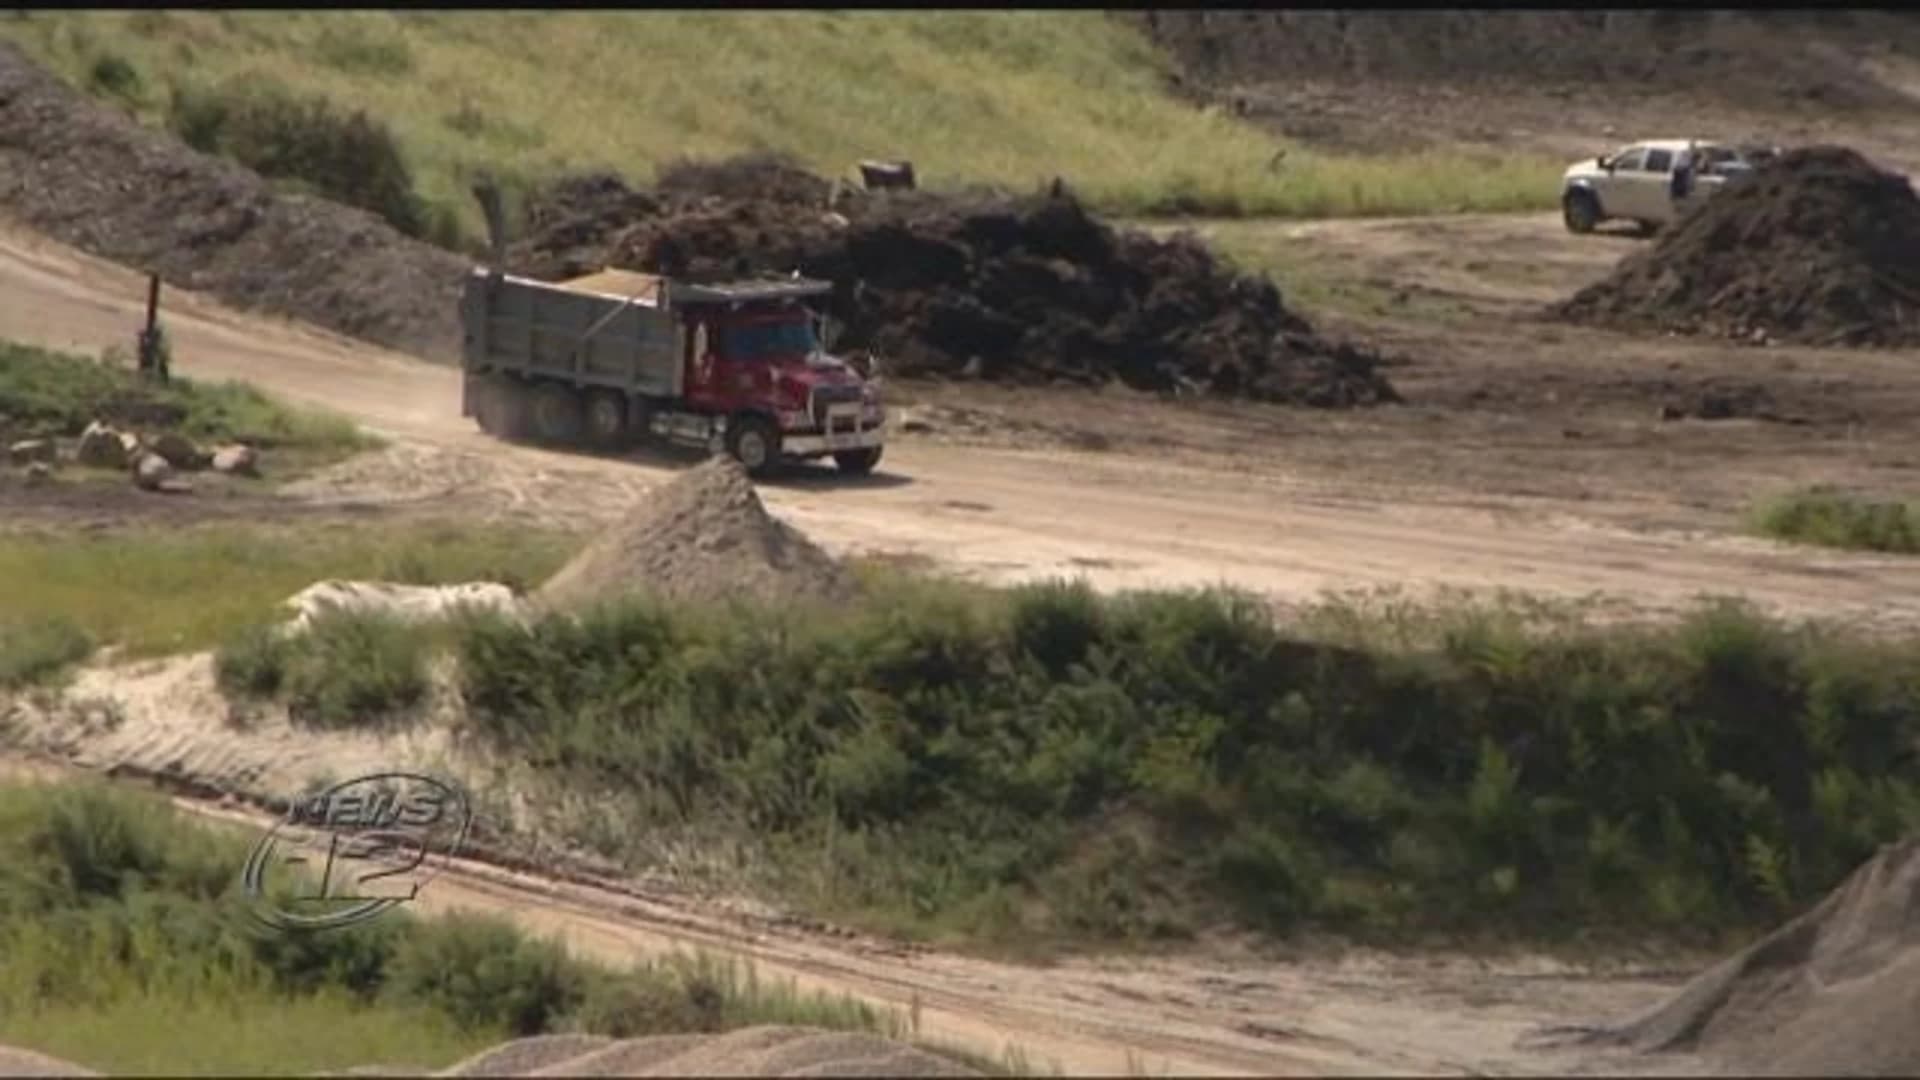 Controversial Sand Land mine to close within 8 years as part of state agreement